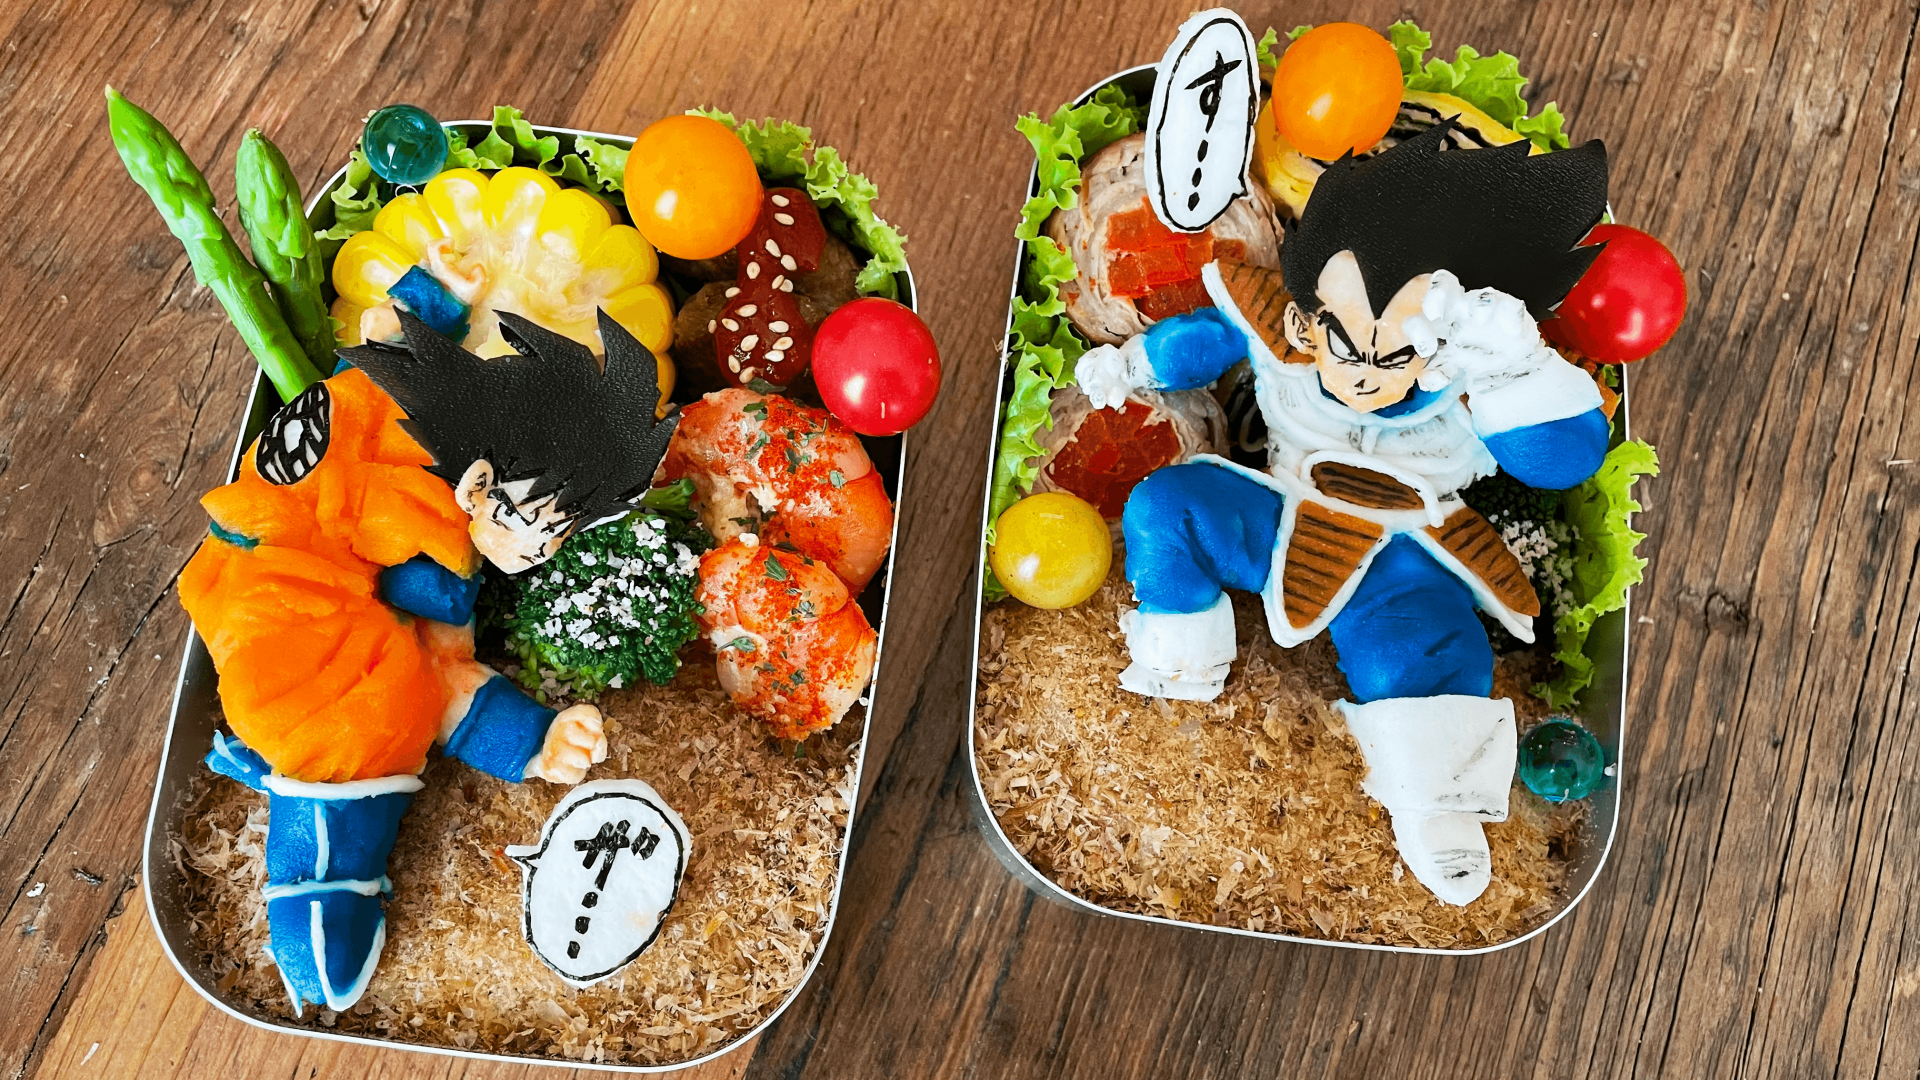 Dragon Ball Character Bento Box Festival!! Recreating Iconic Scenes with Japanese Ingredients! (Part 1)